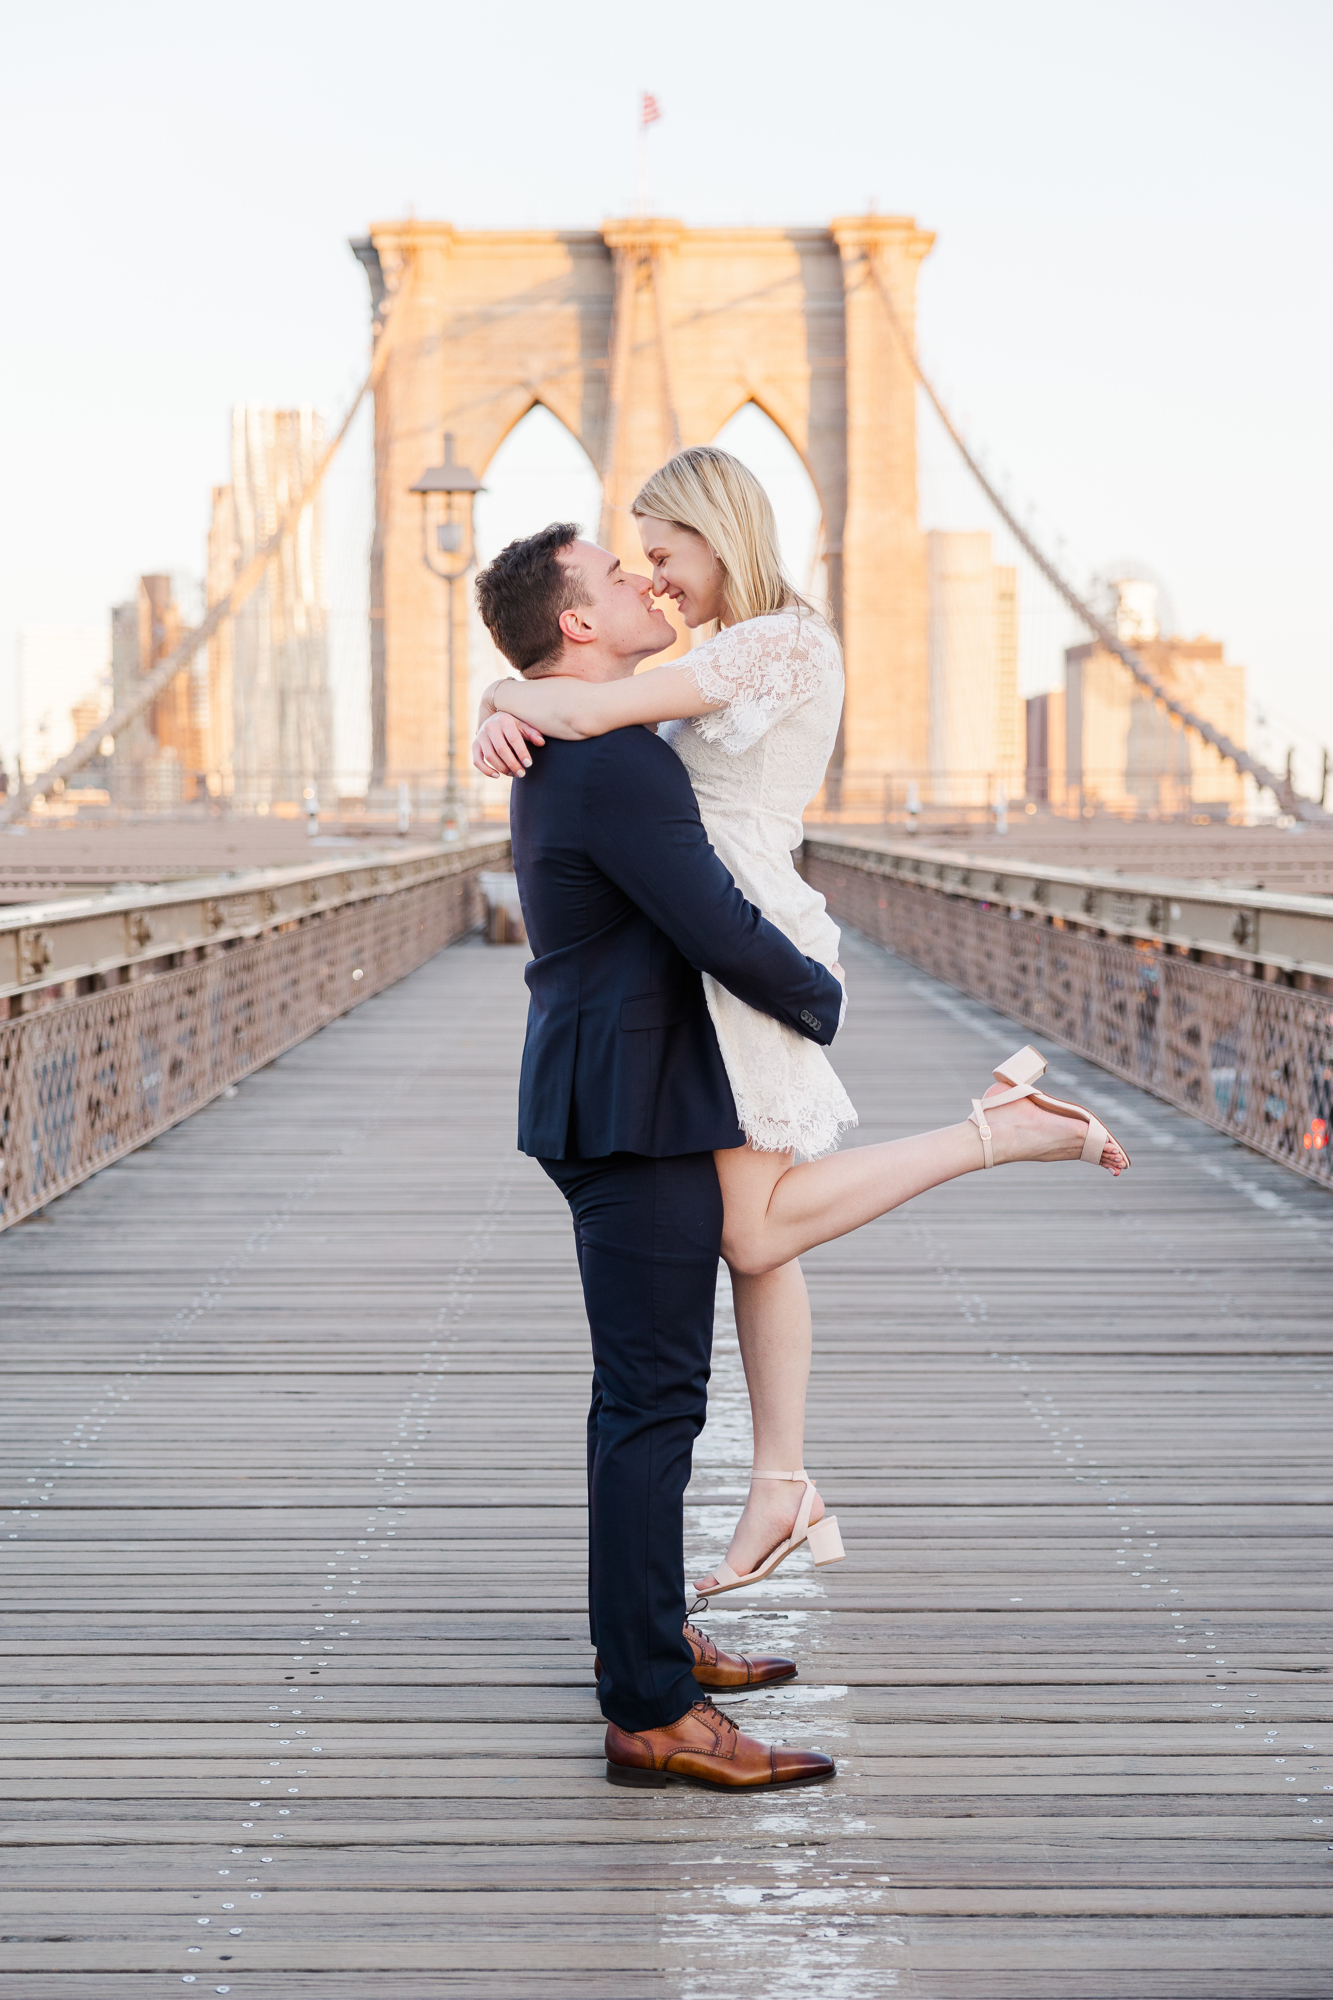 Timeless Brooklyn Bridge Engagement Photos in Late Fall